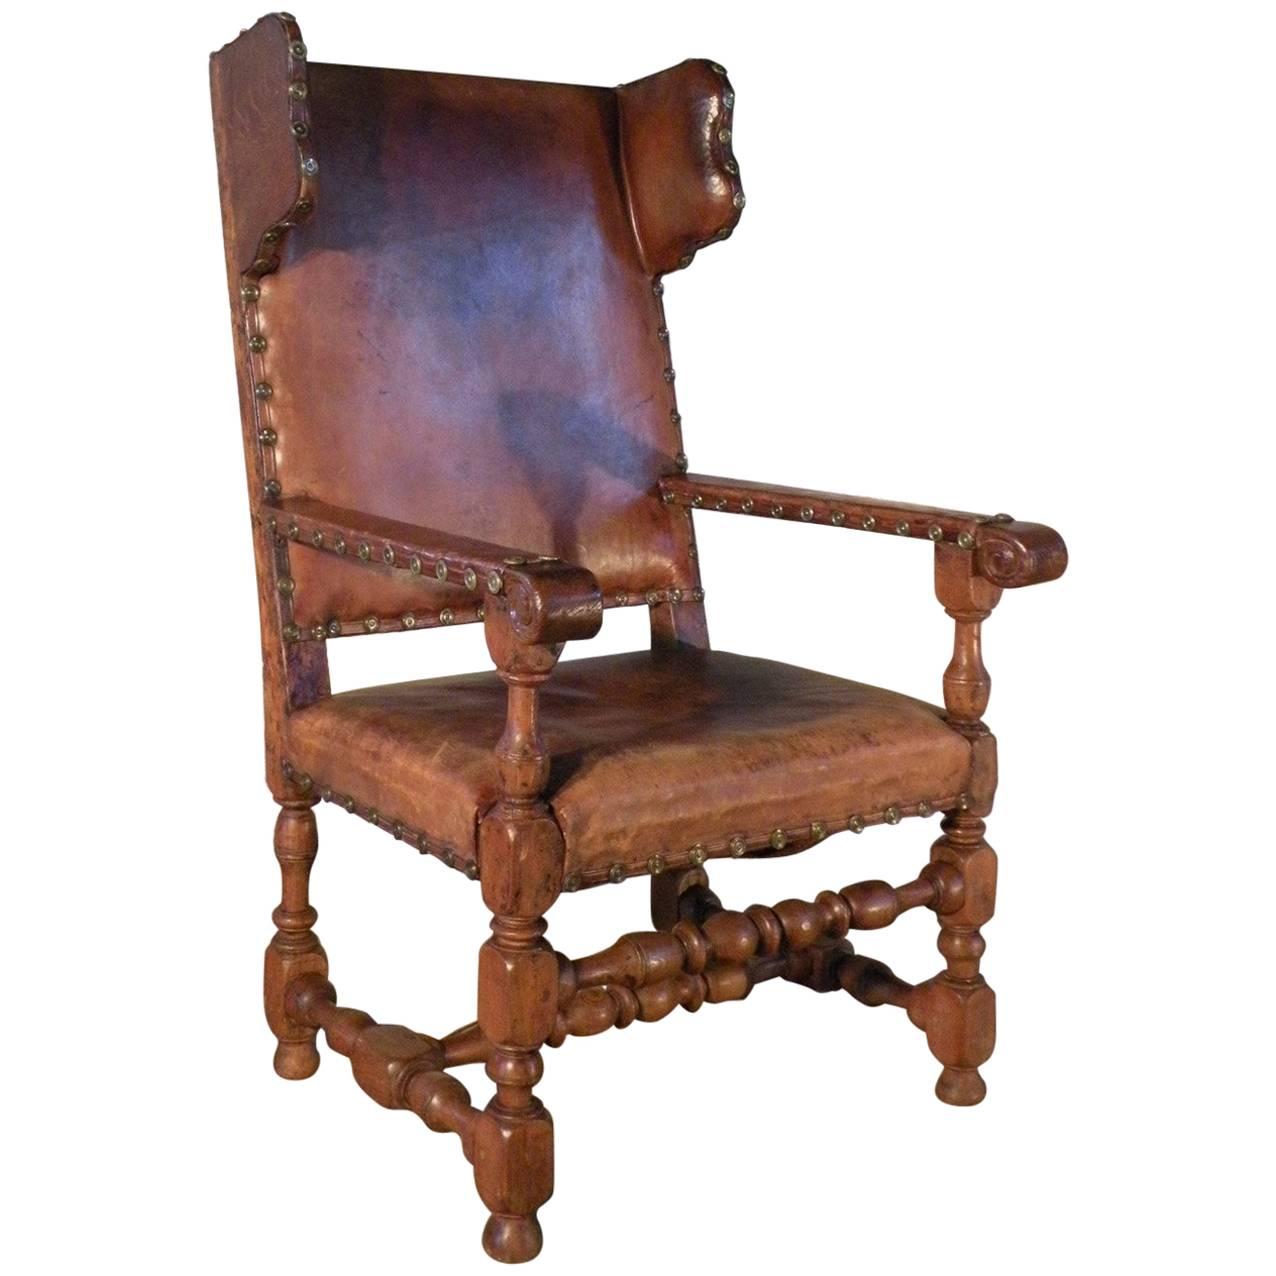 Swedish Baroque 17th Century Leather-Covered Wing Back Armchair